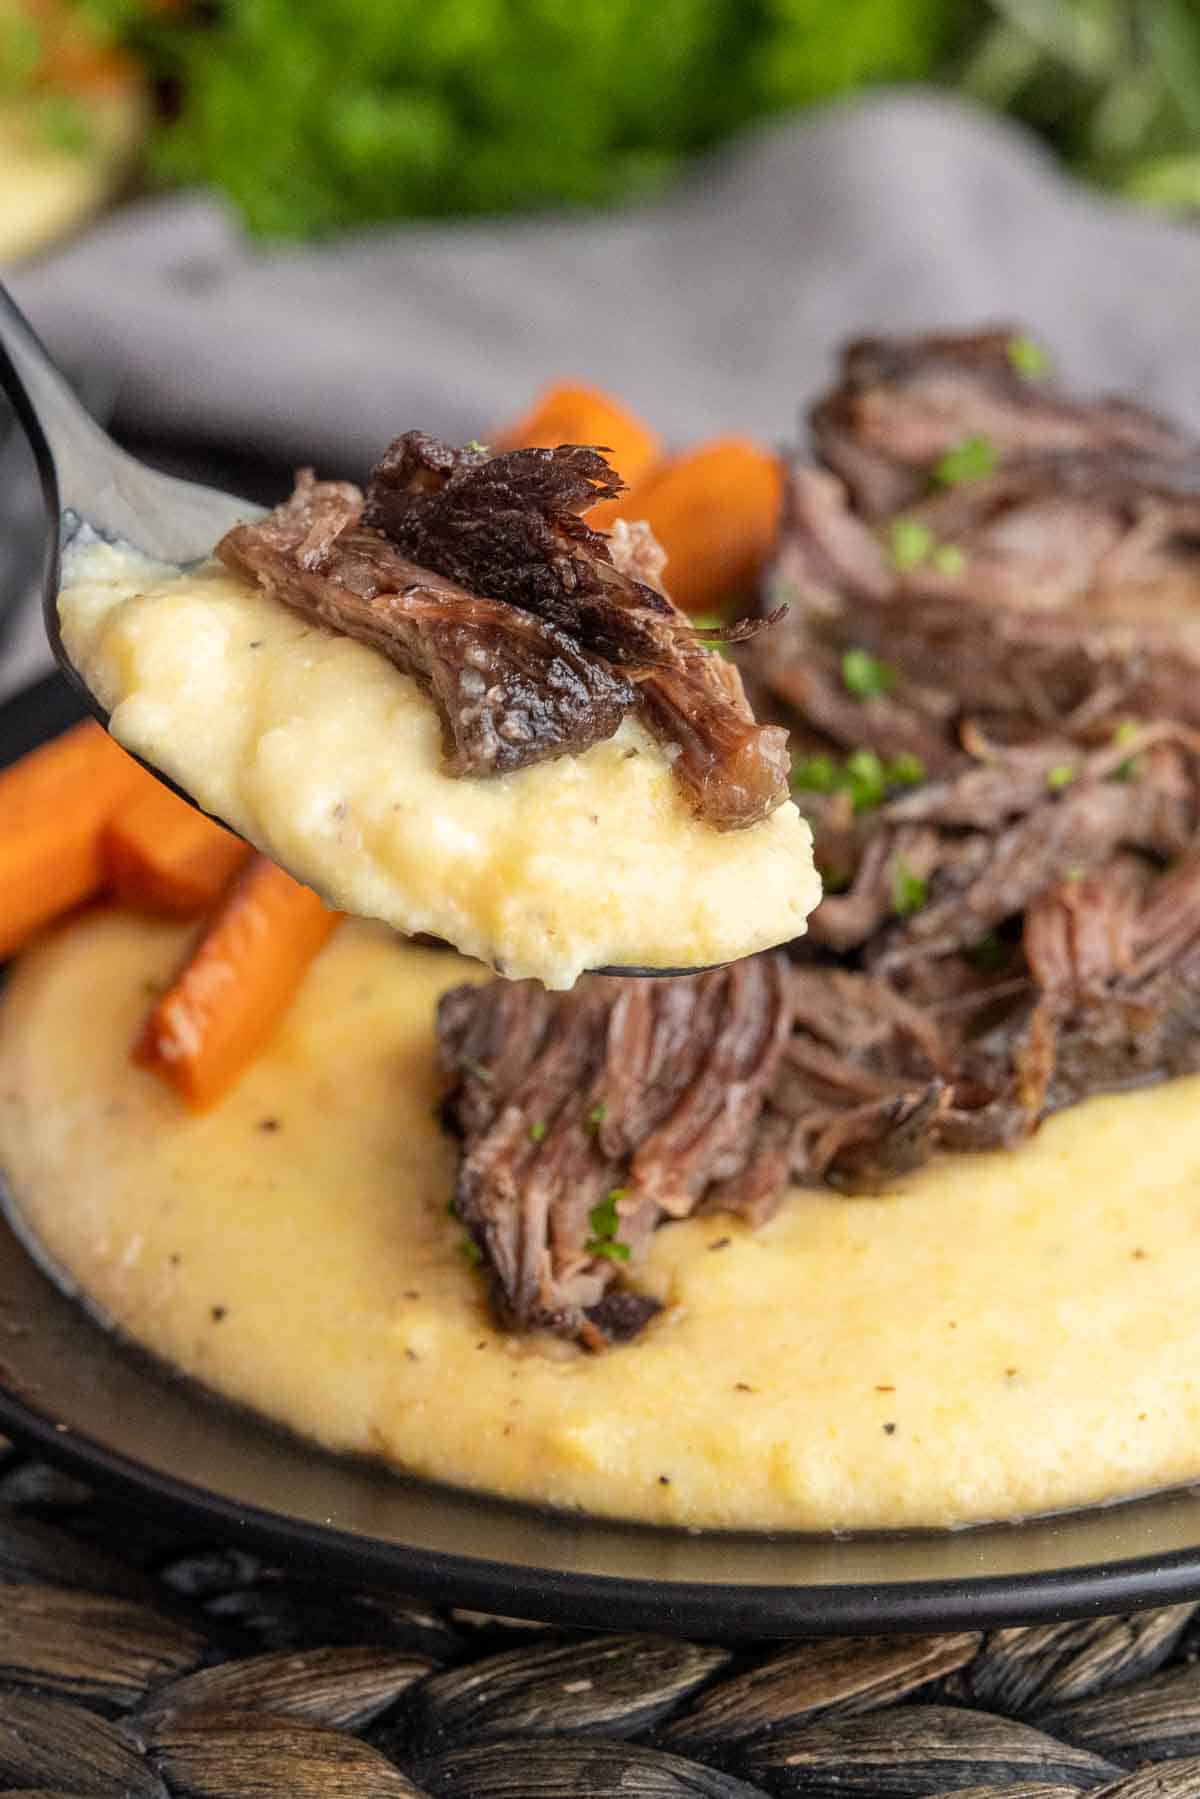 Creamy Polenta and braised ribs on a spoon